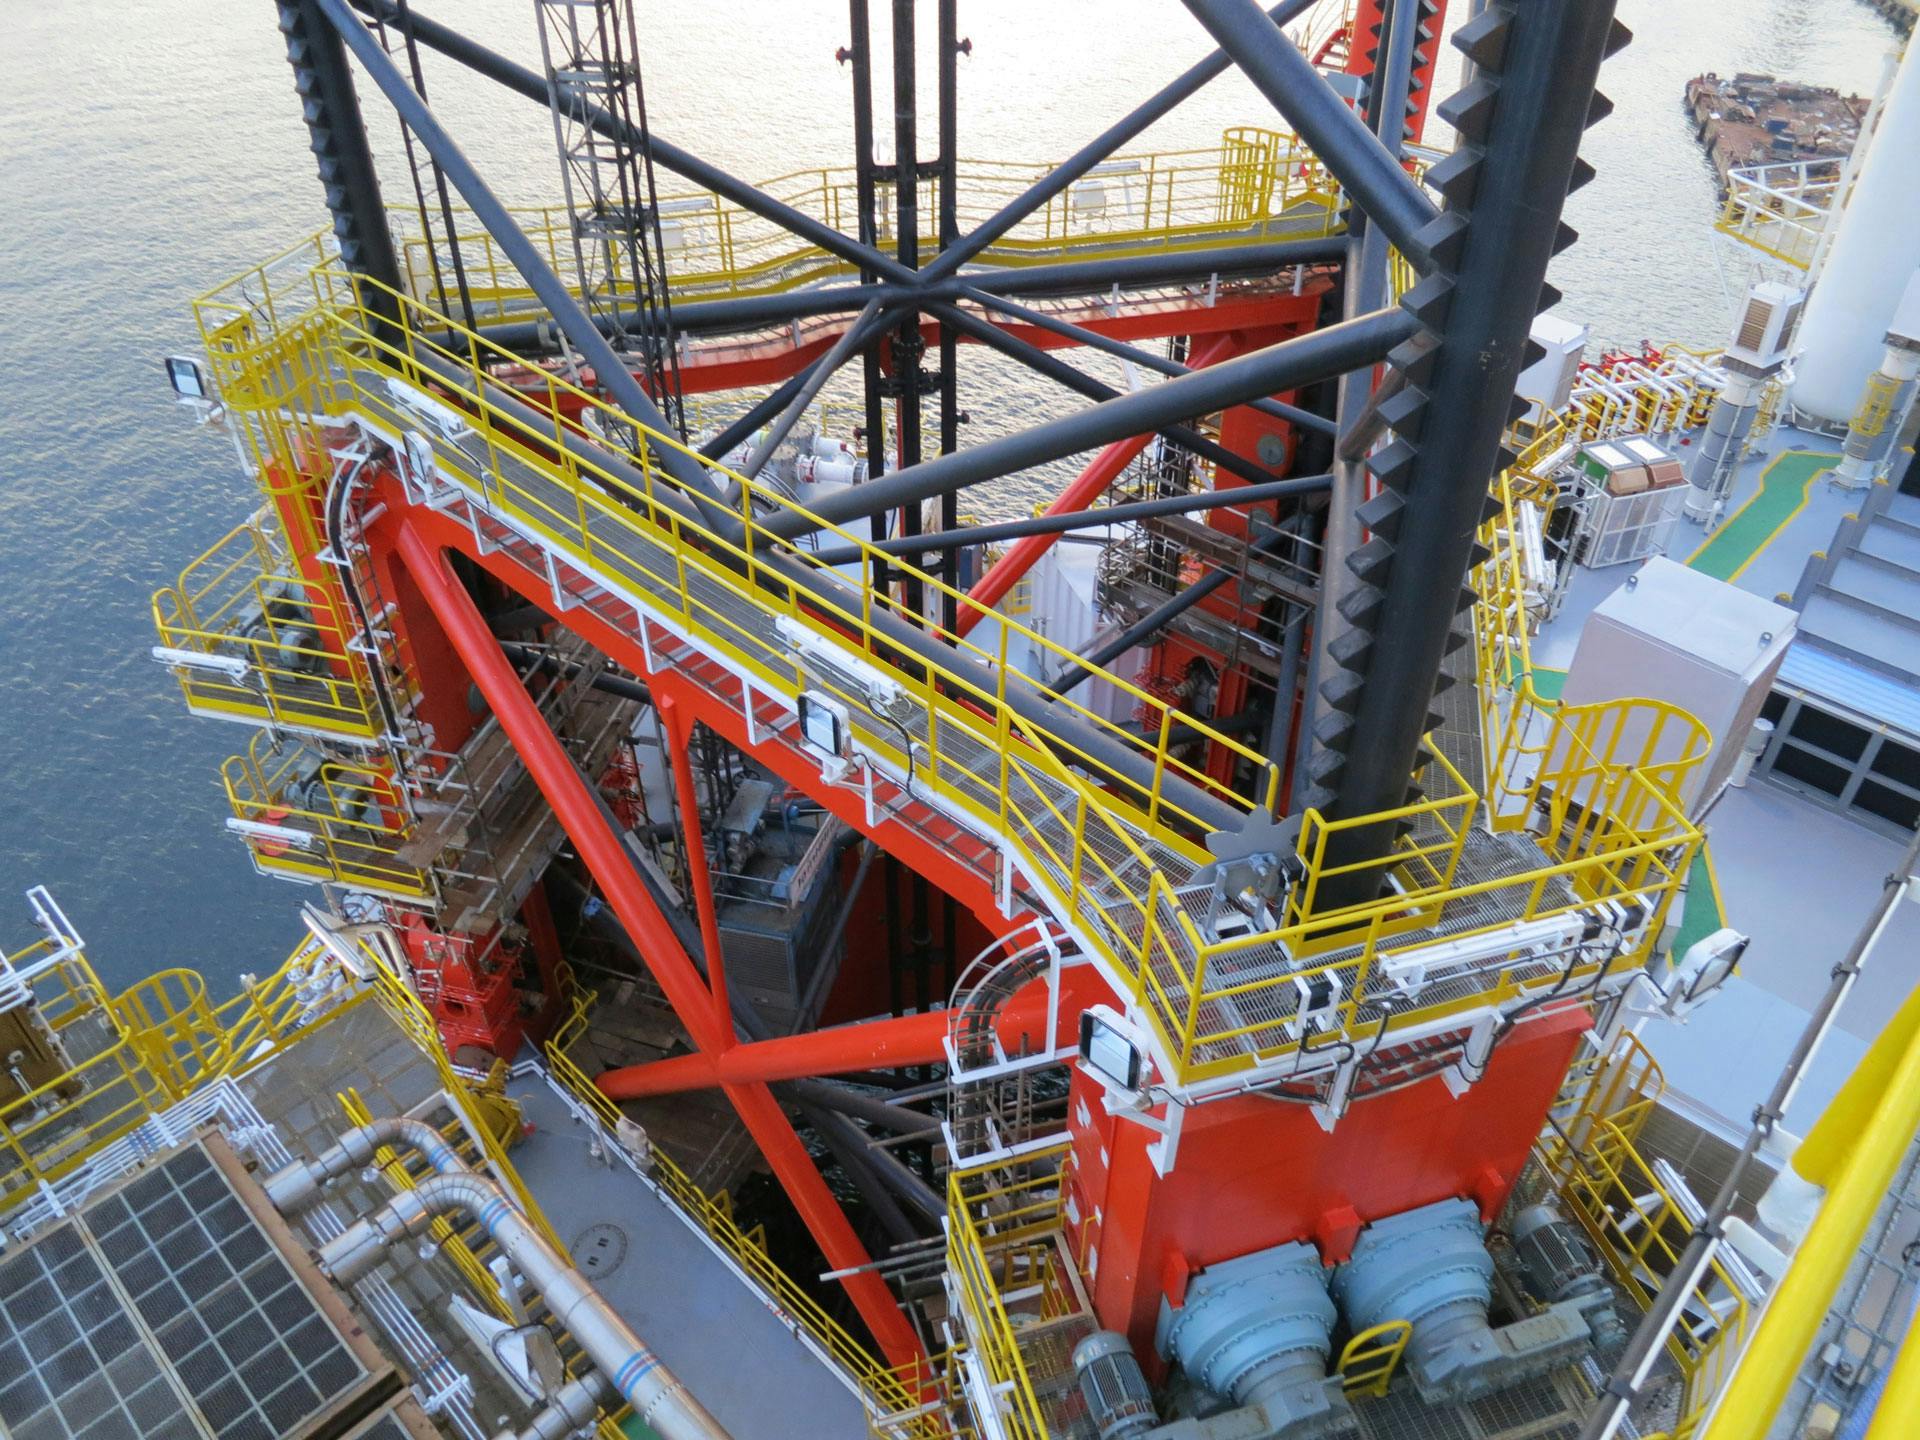 Catwalk and railing from an aerial view of a rig